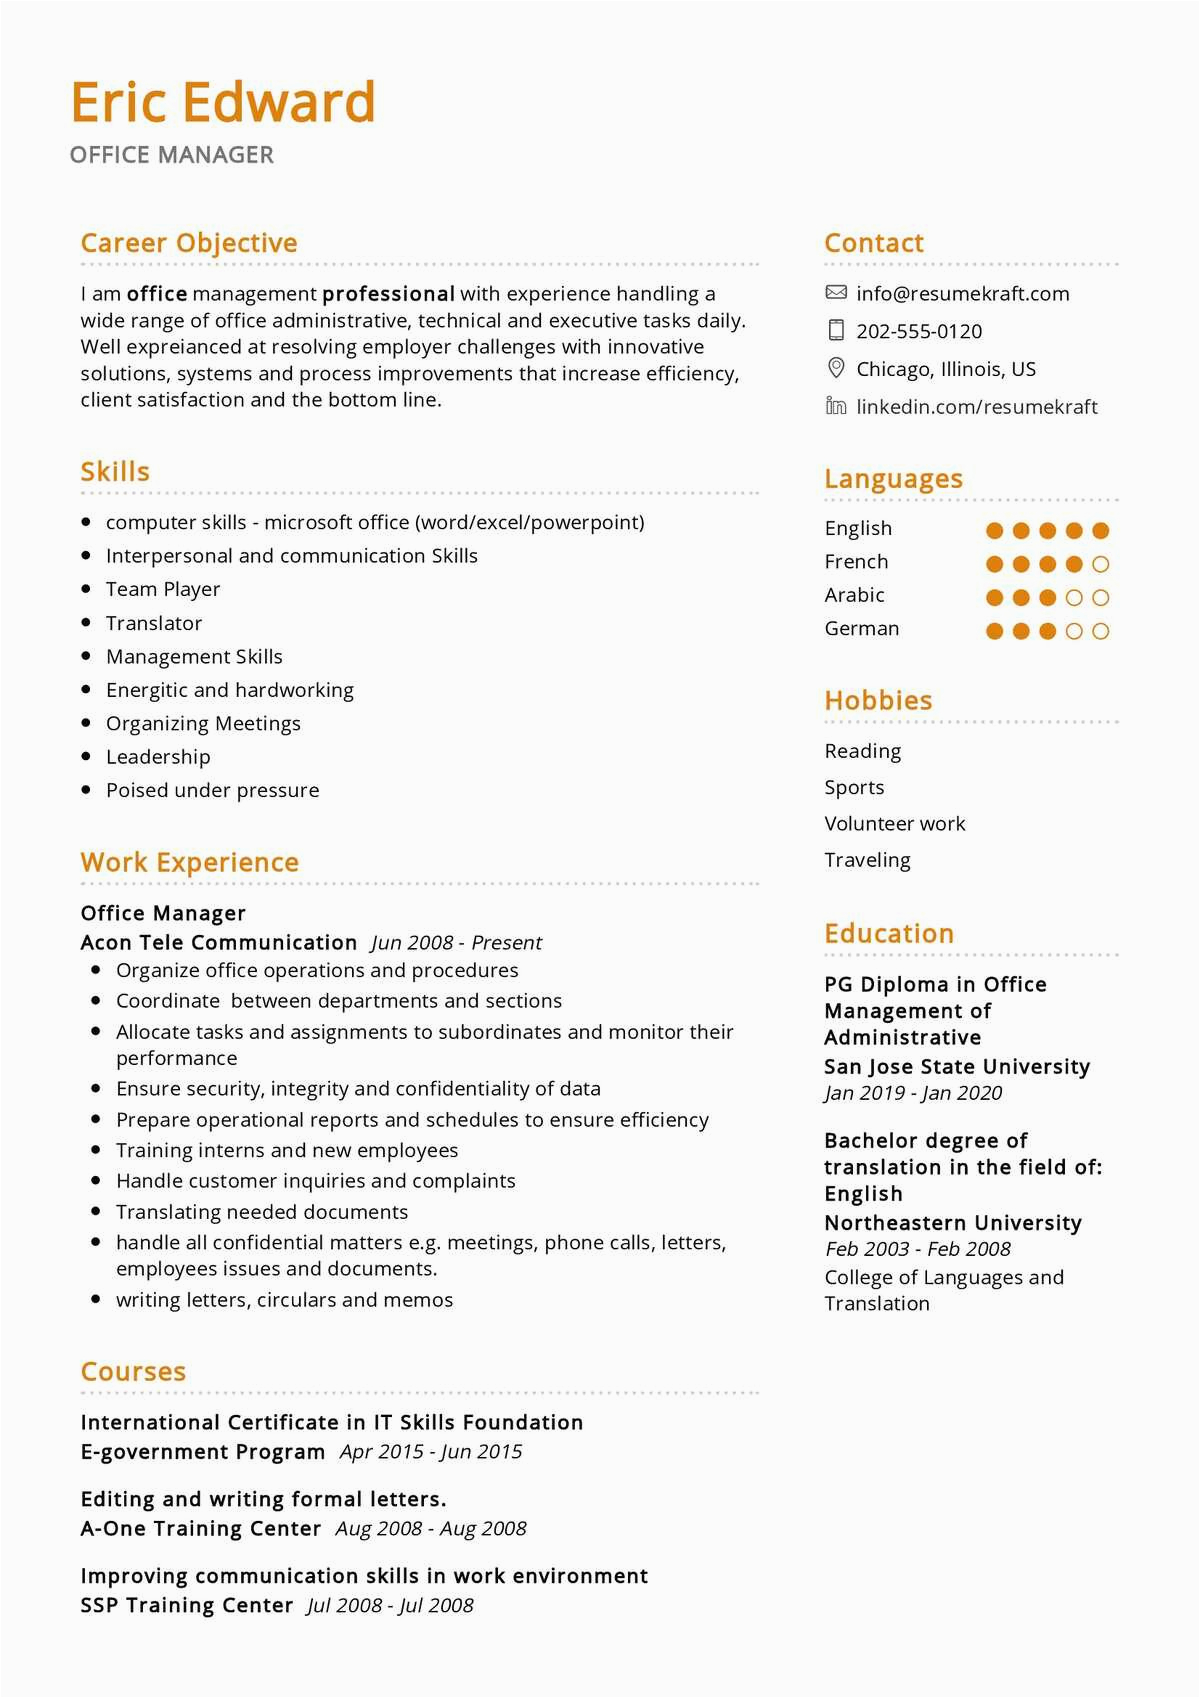 Resume Sample for An Experienced Office Manager Fice Manager Resume Sample 2022